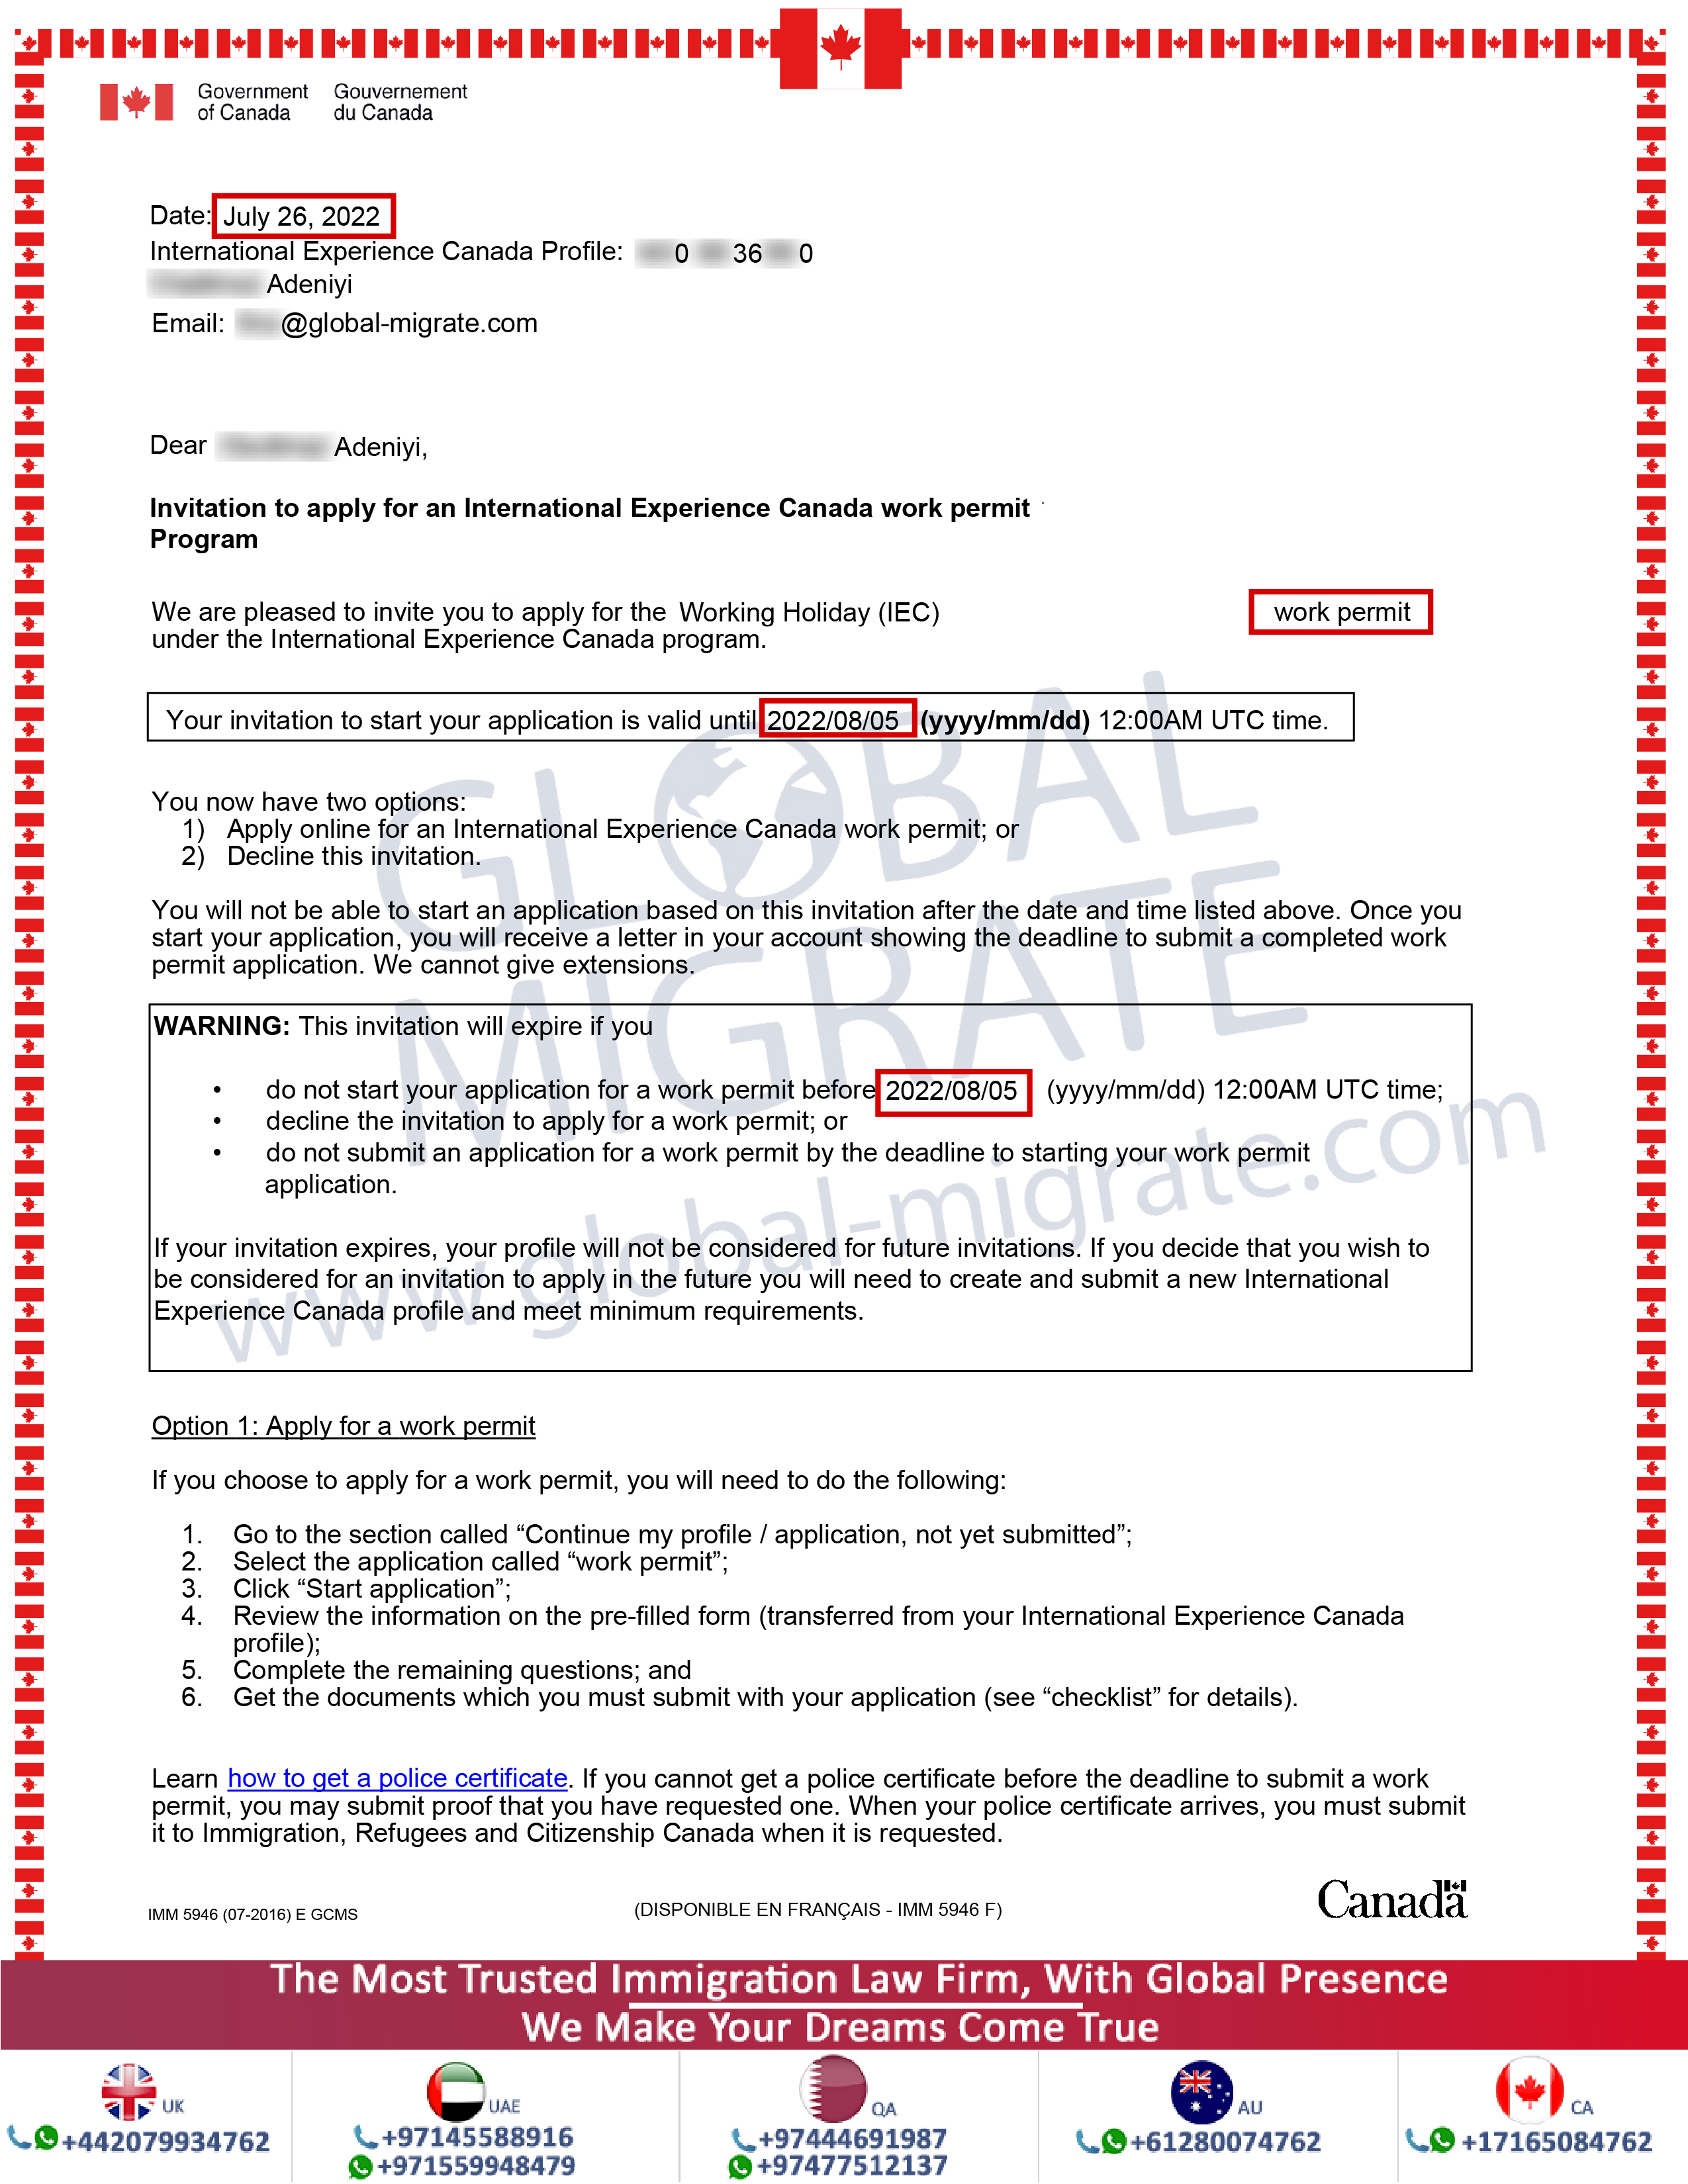 canada-work-permit-approval-global-migrate